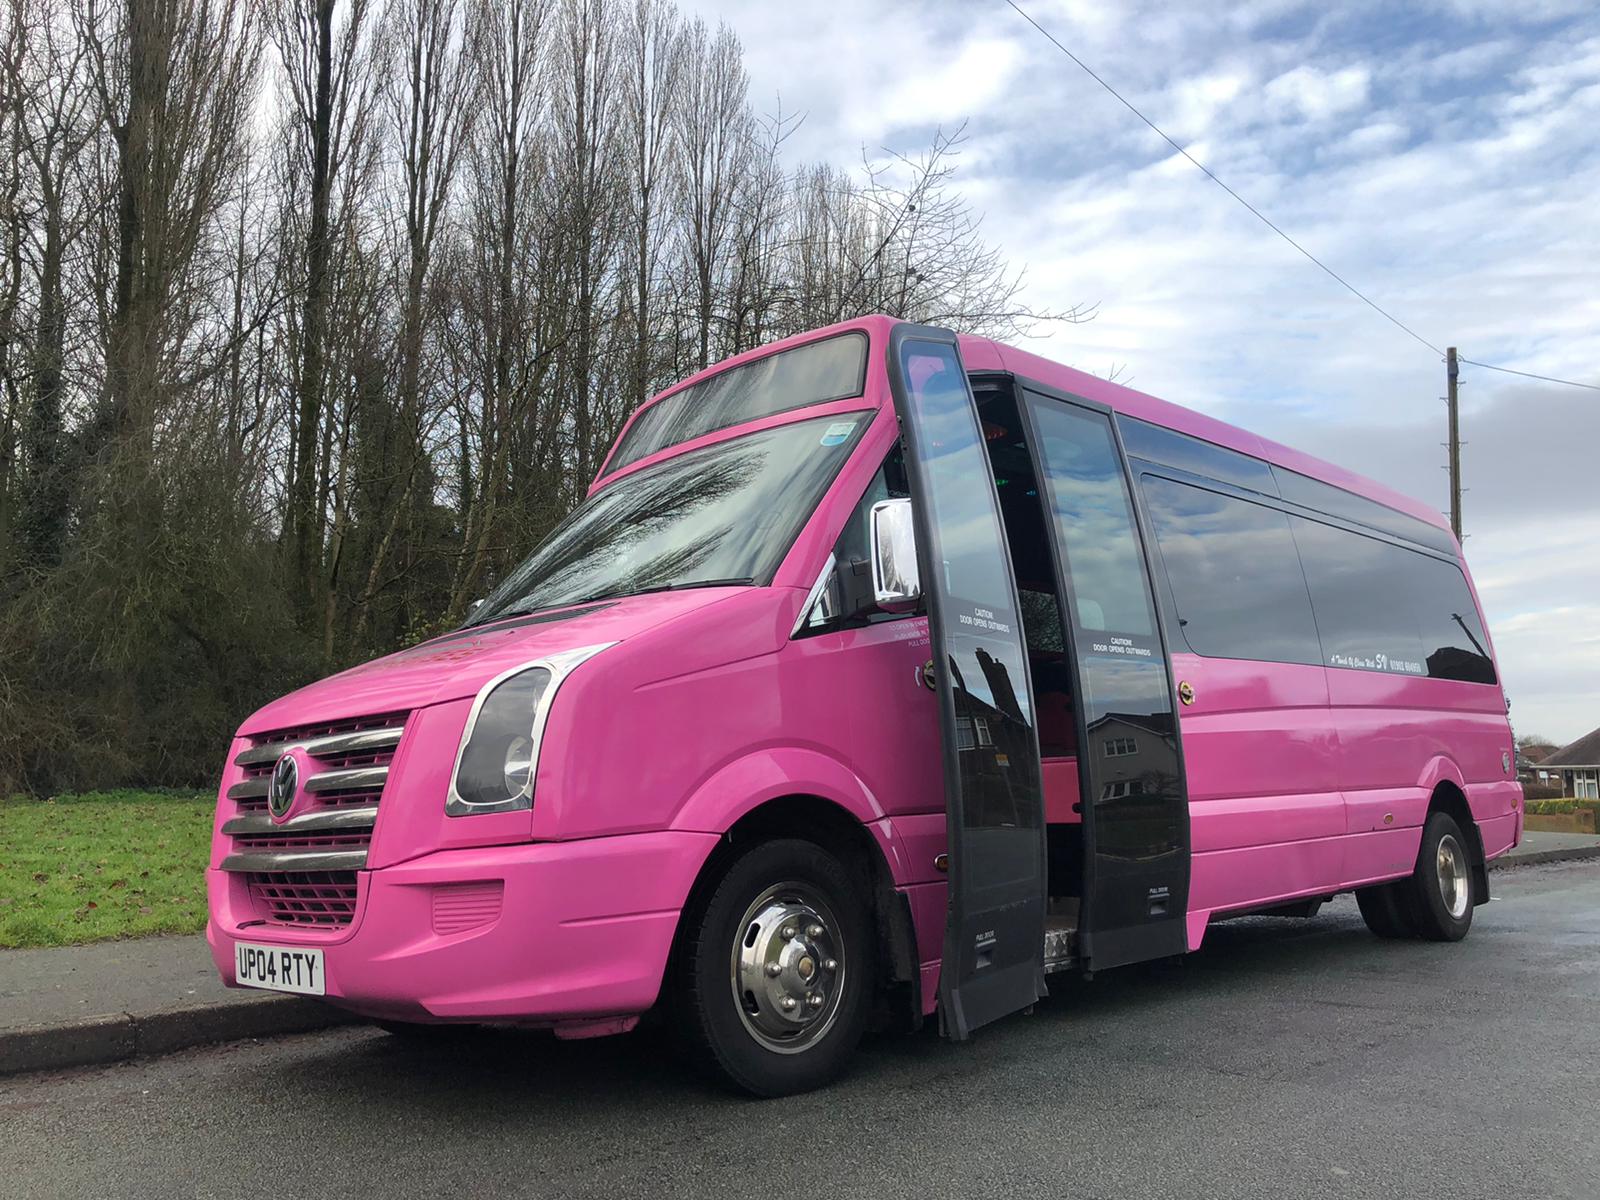 Top Features to Look for in a Westerham Party Bus Rental